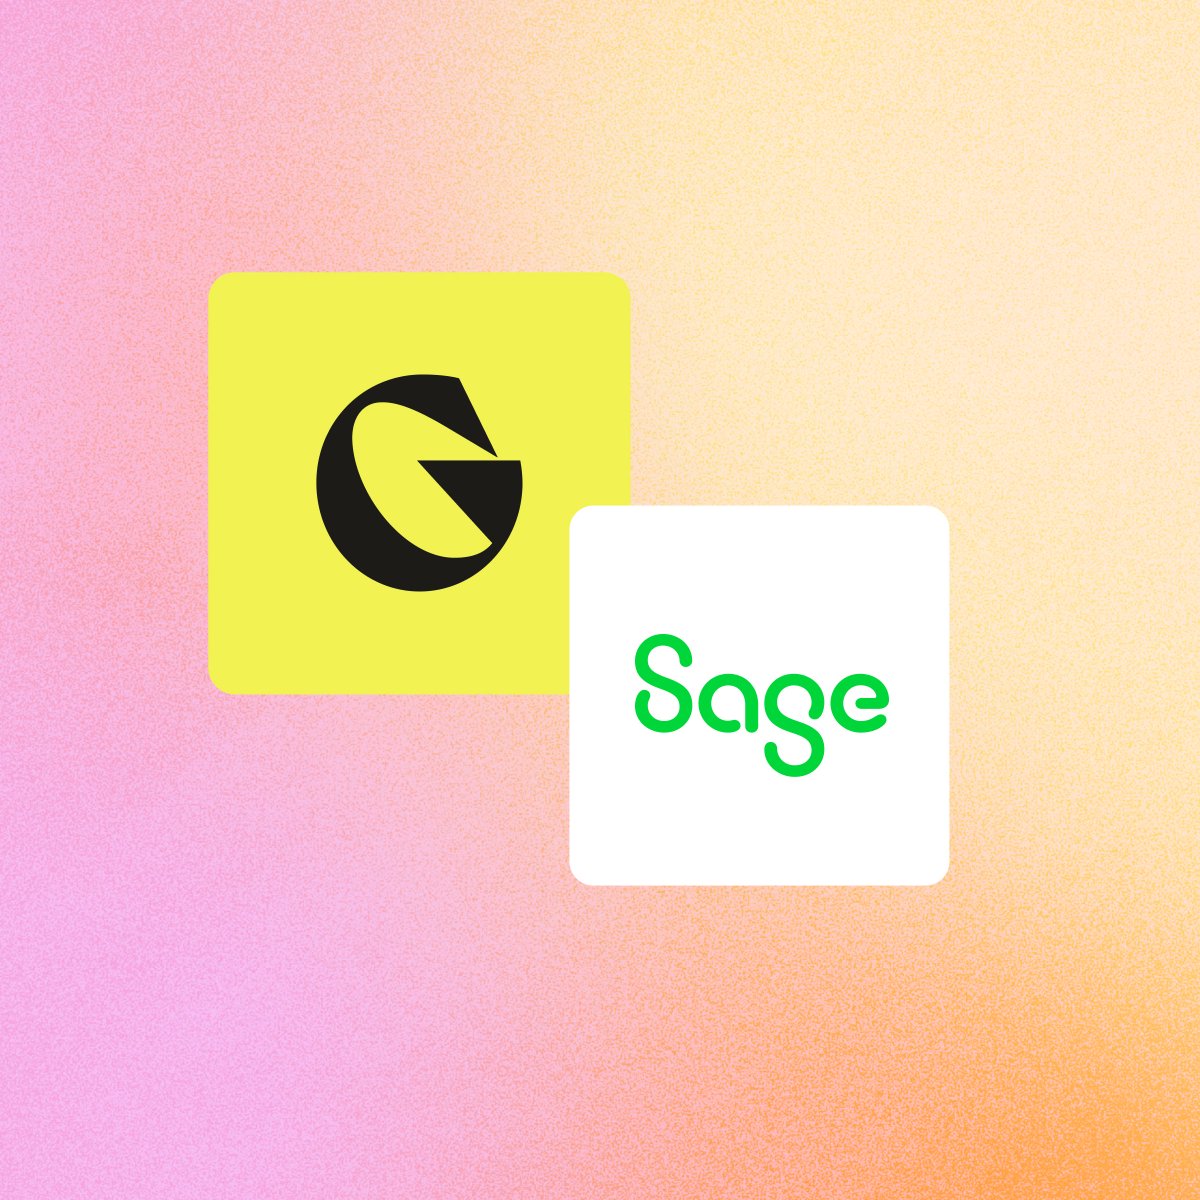 We have extended our partnership with Sage! Sage Accounting and Sage Intacct customers can now get paid faster and avoid costly fees with Direct Debit and open banking payments through GoCardless. Read the news here: gocardless.com/blog/gocardles… @sageuk @SageFrance @sagegroupplc